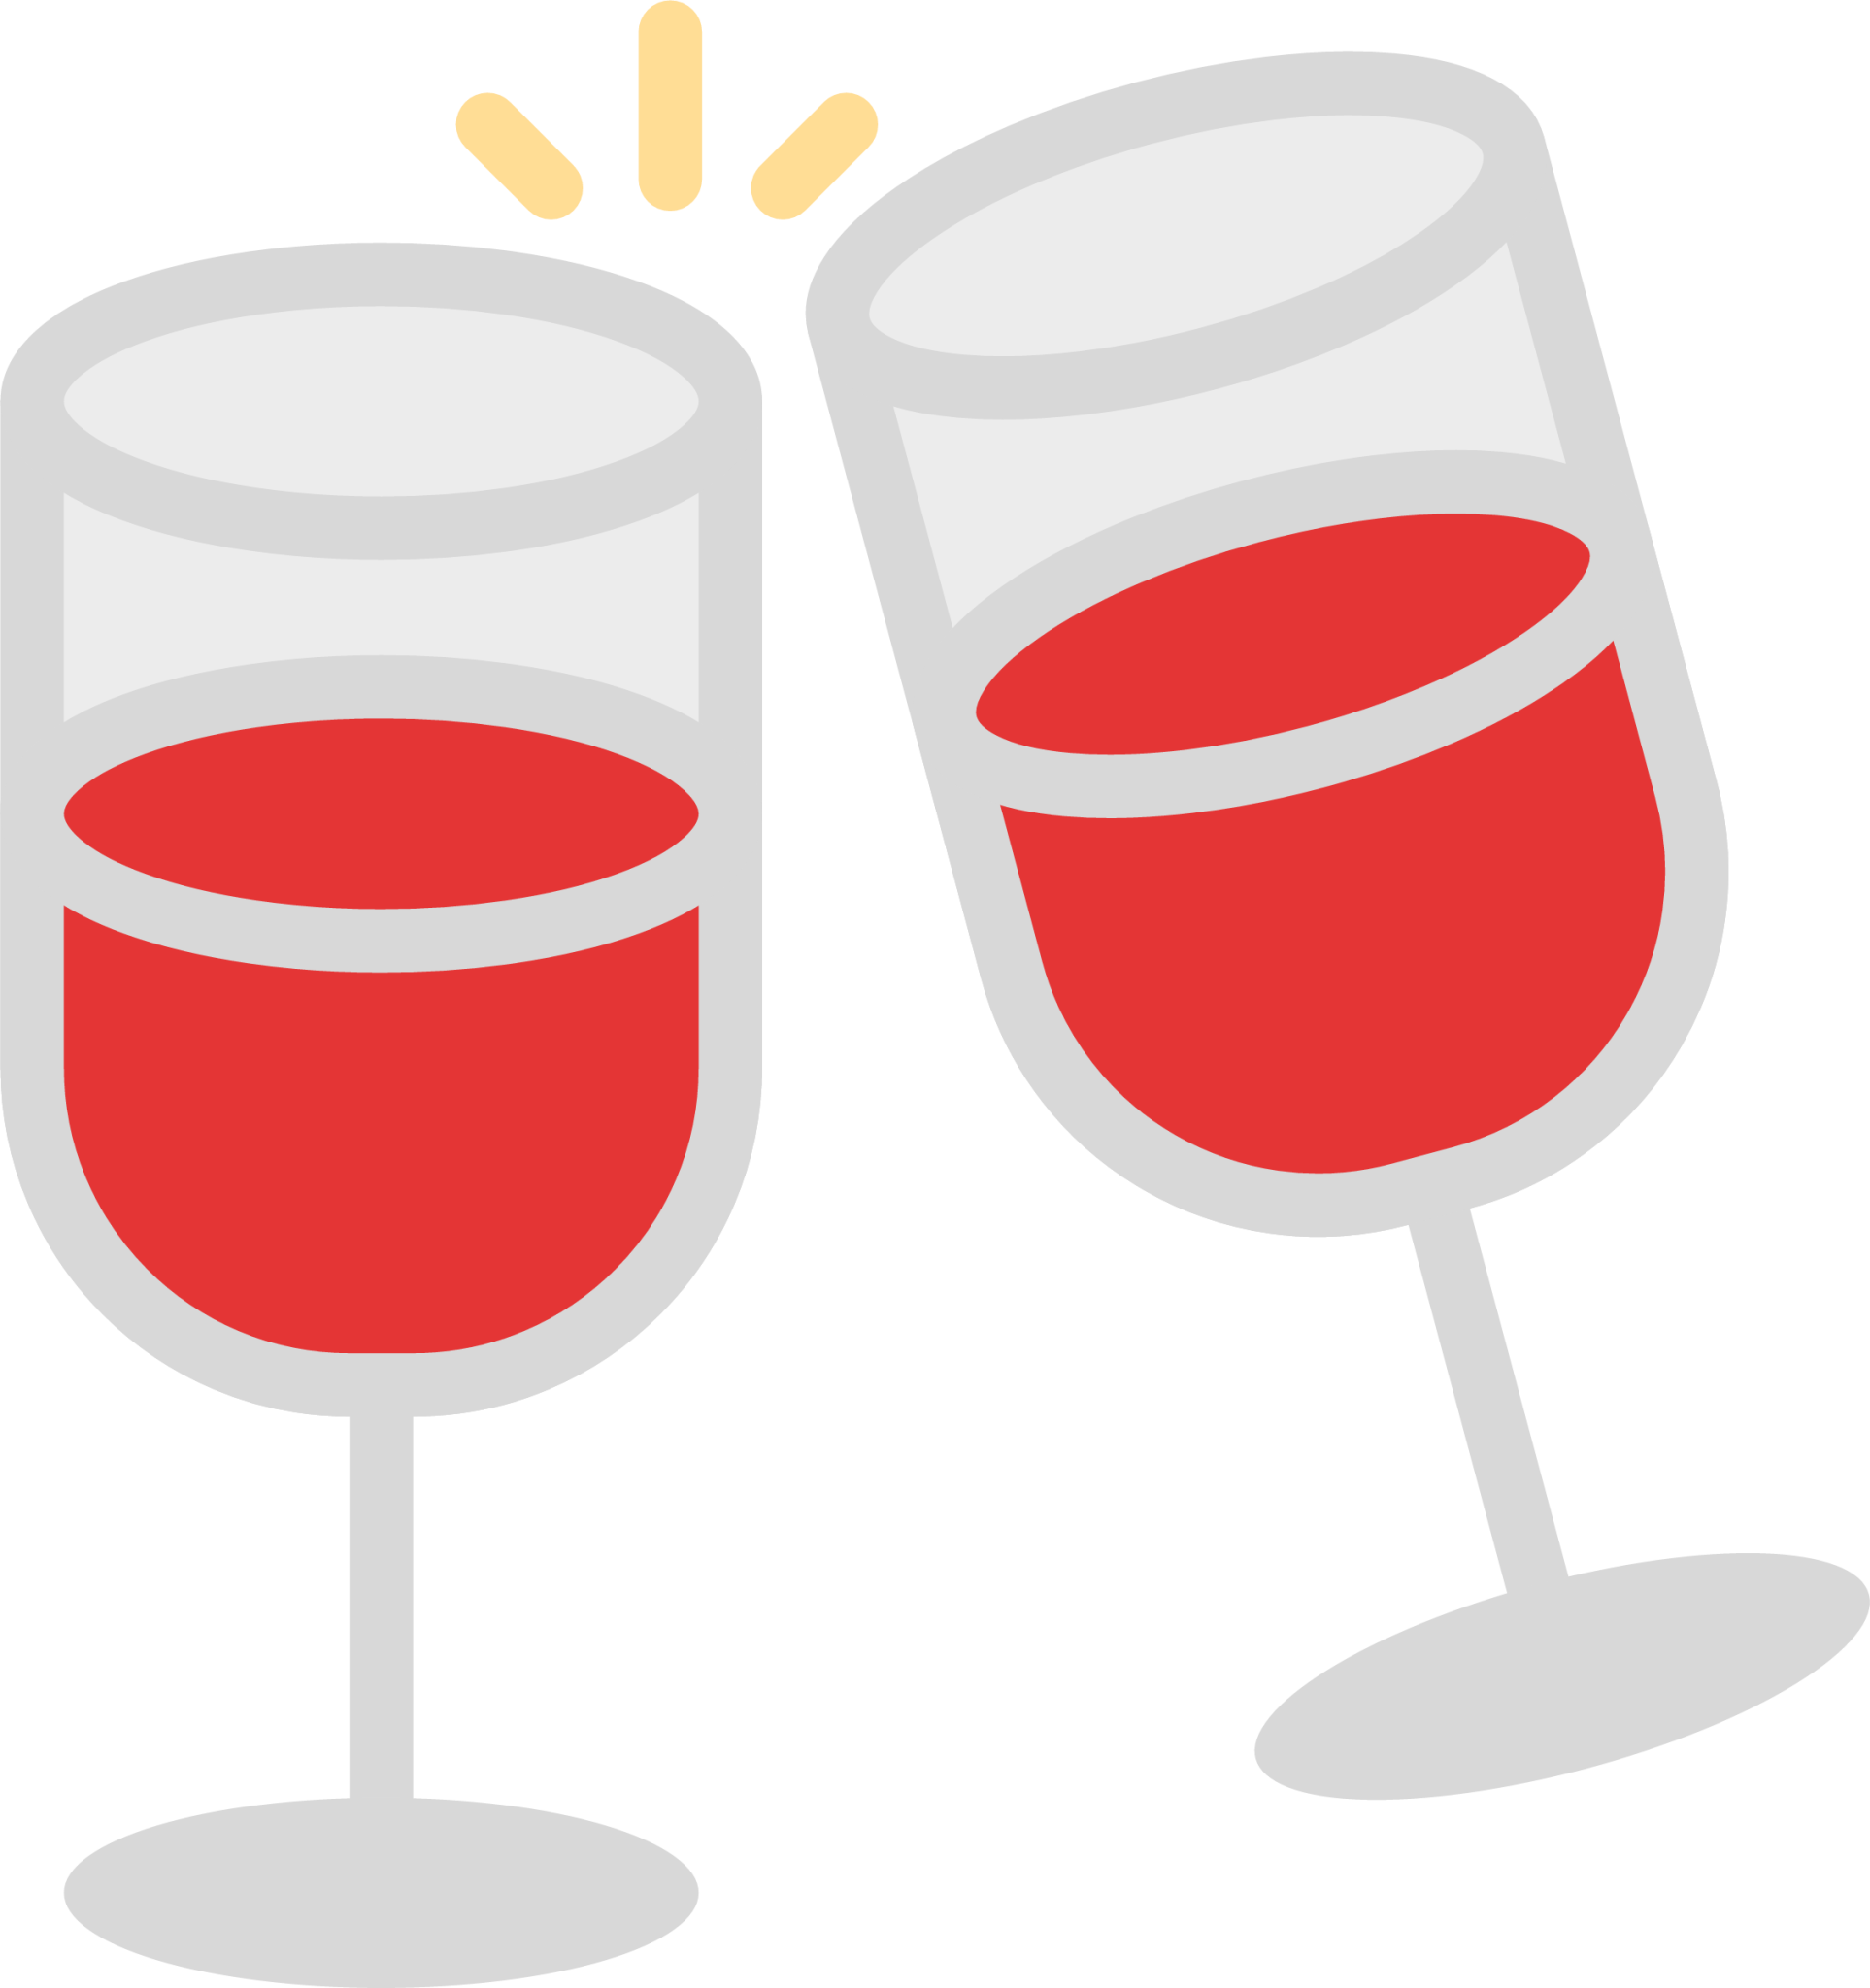 two glasses of wine icon